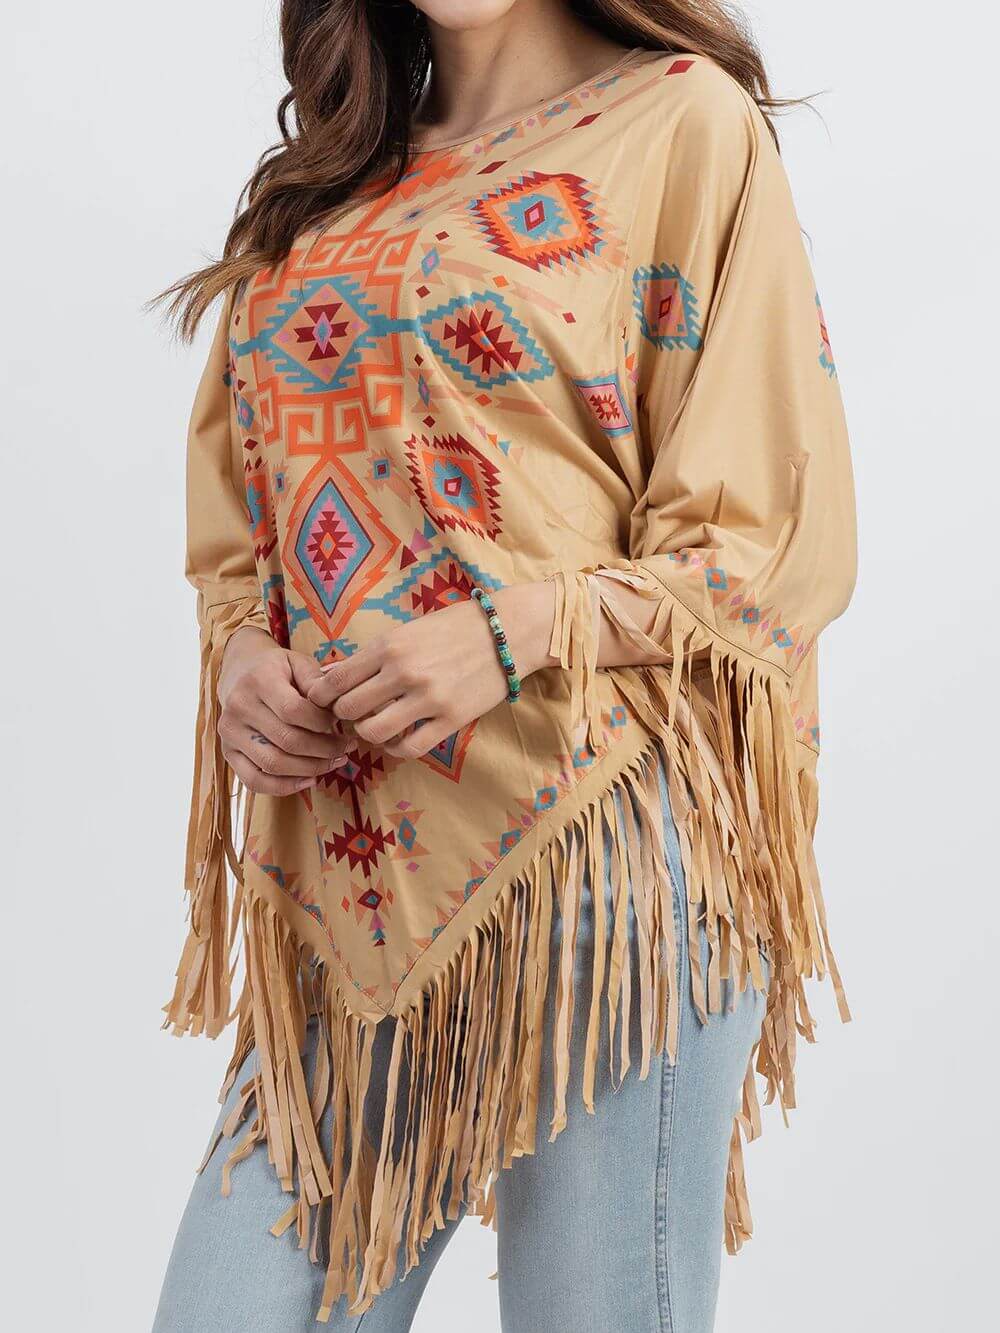 Montana West American Bling Aztec All Over Print Fringe Poncho